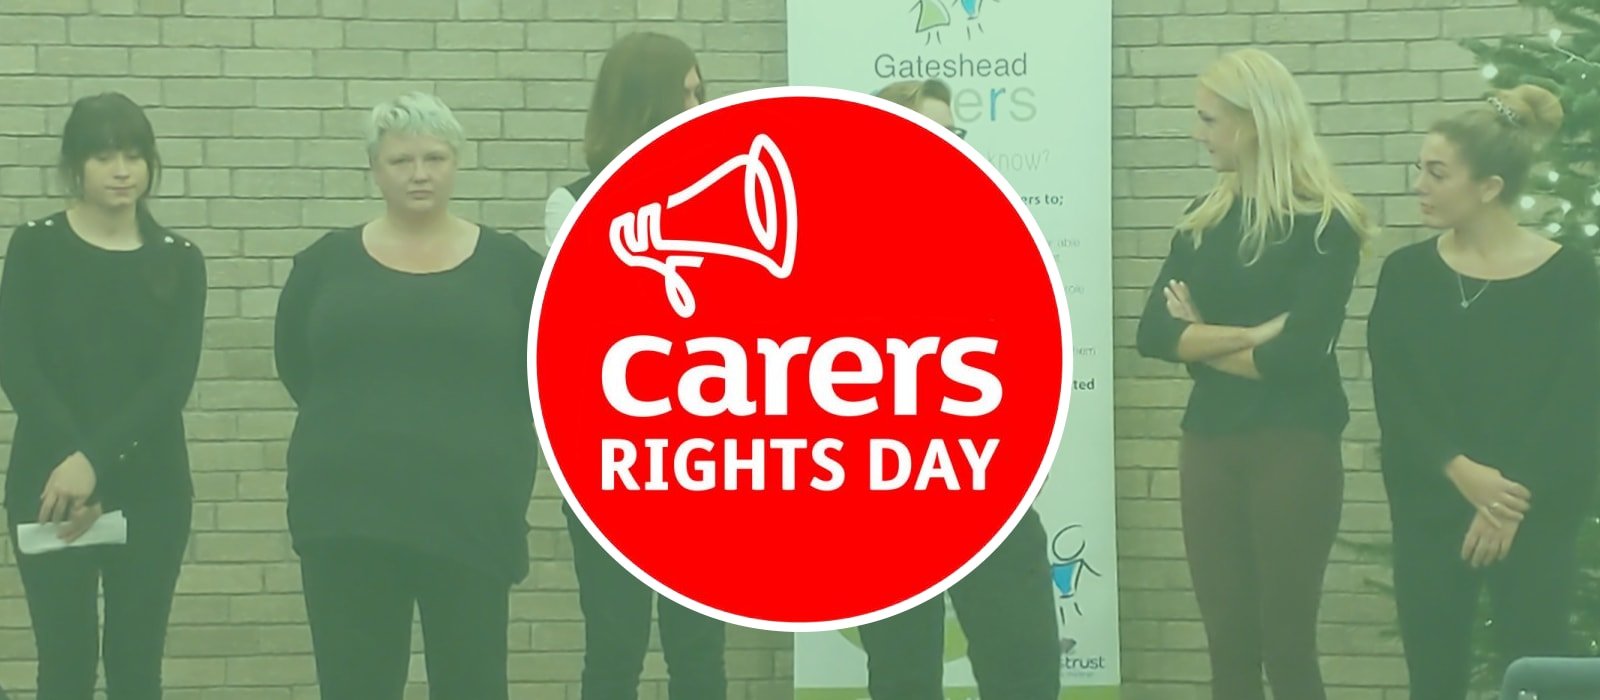 Your rights as a carer